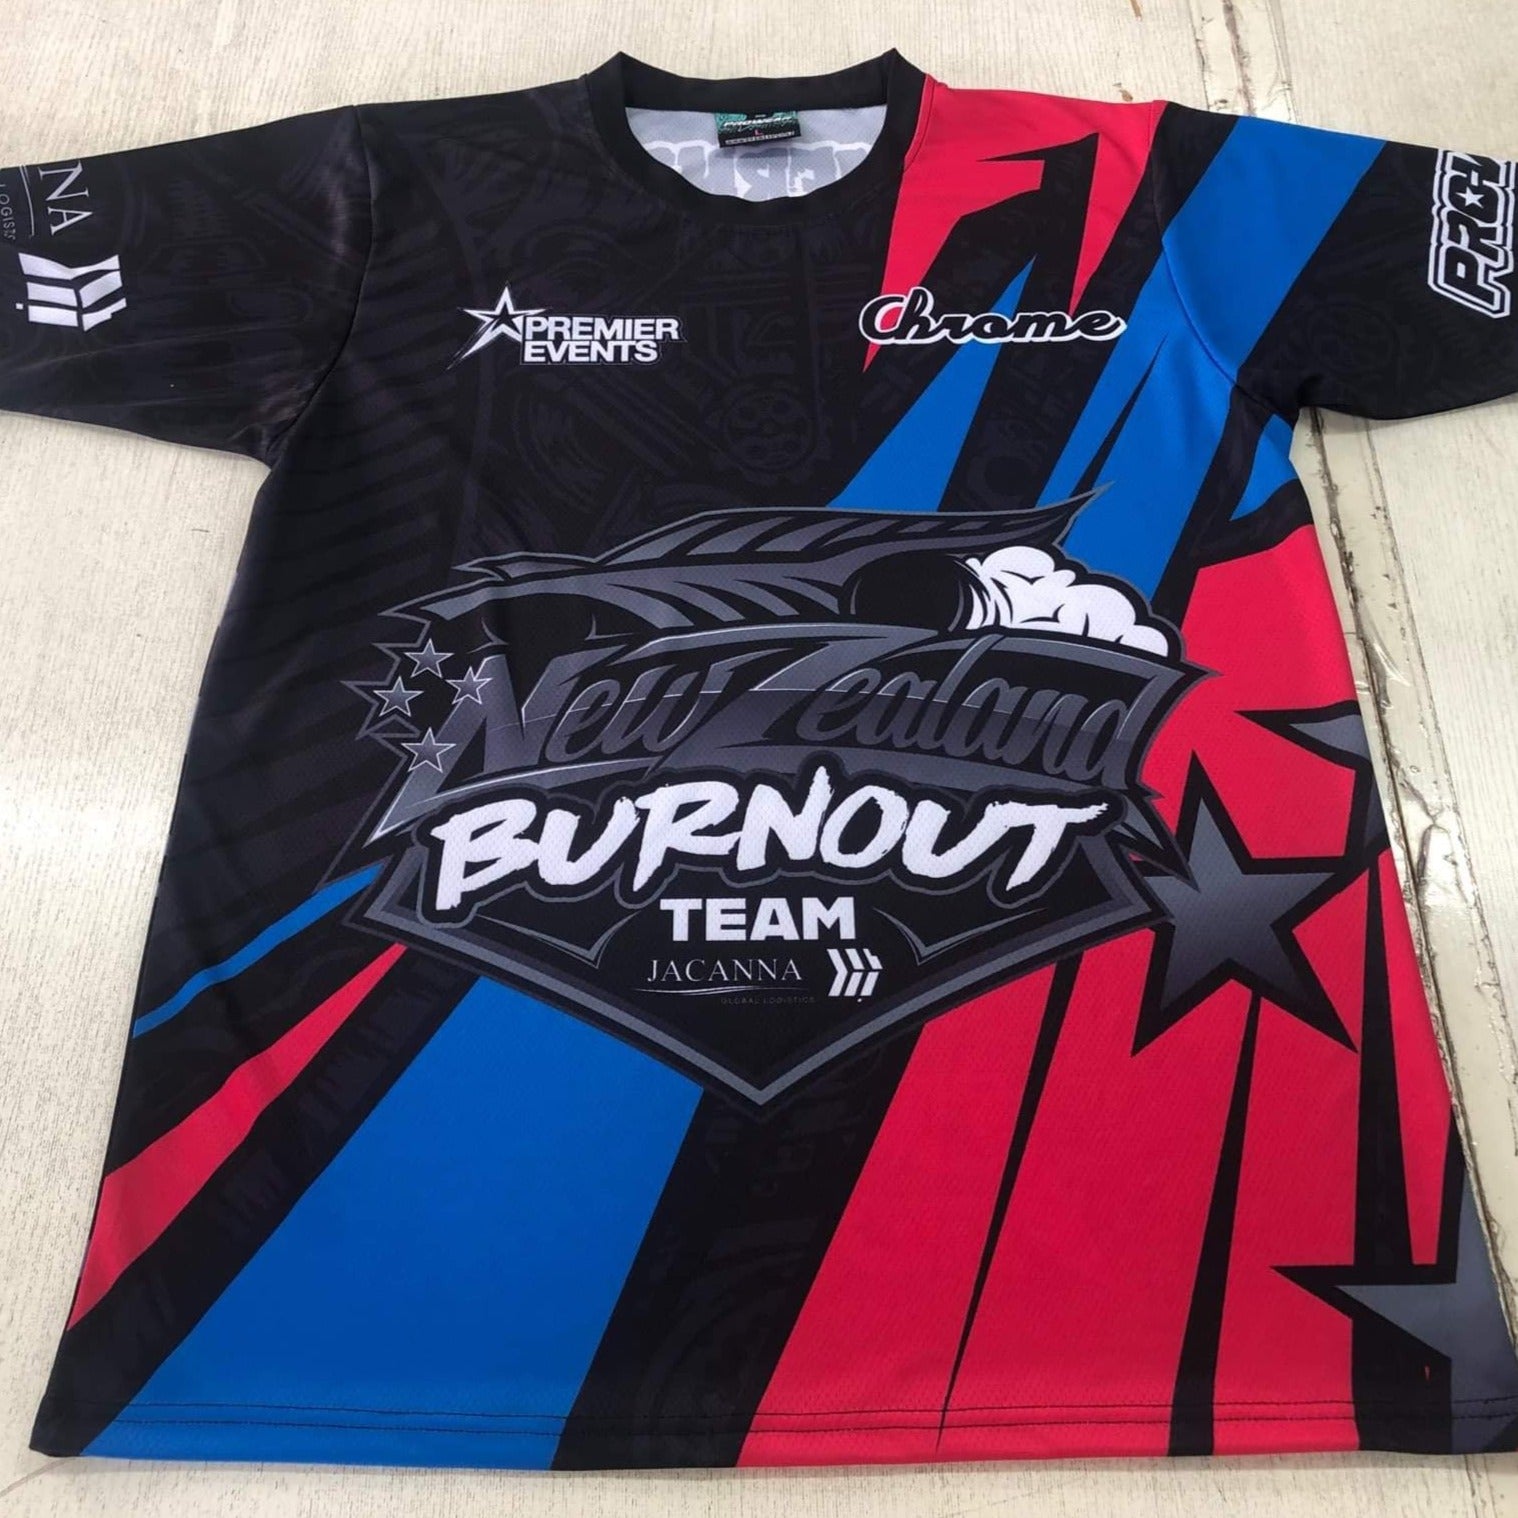 Official Nz Burnout Tour Team Tee -  Limited Edition